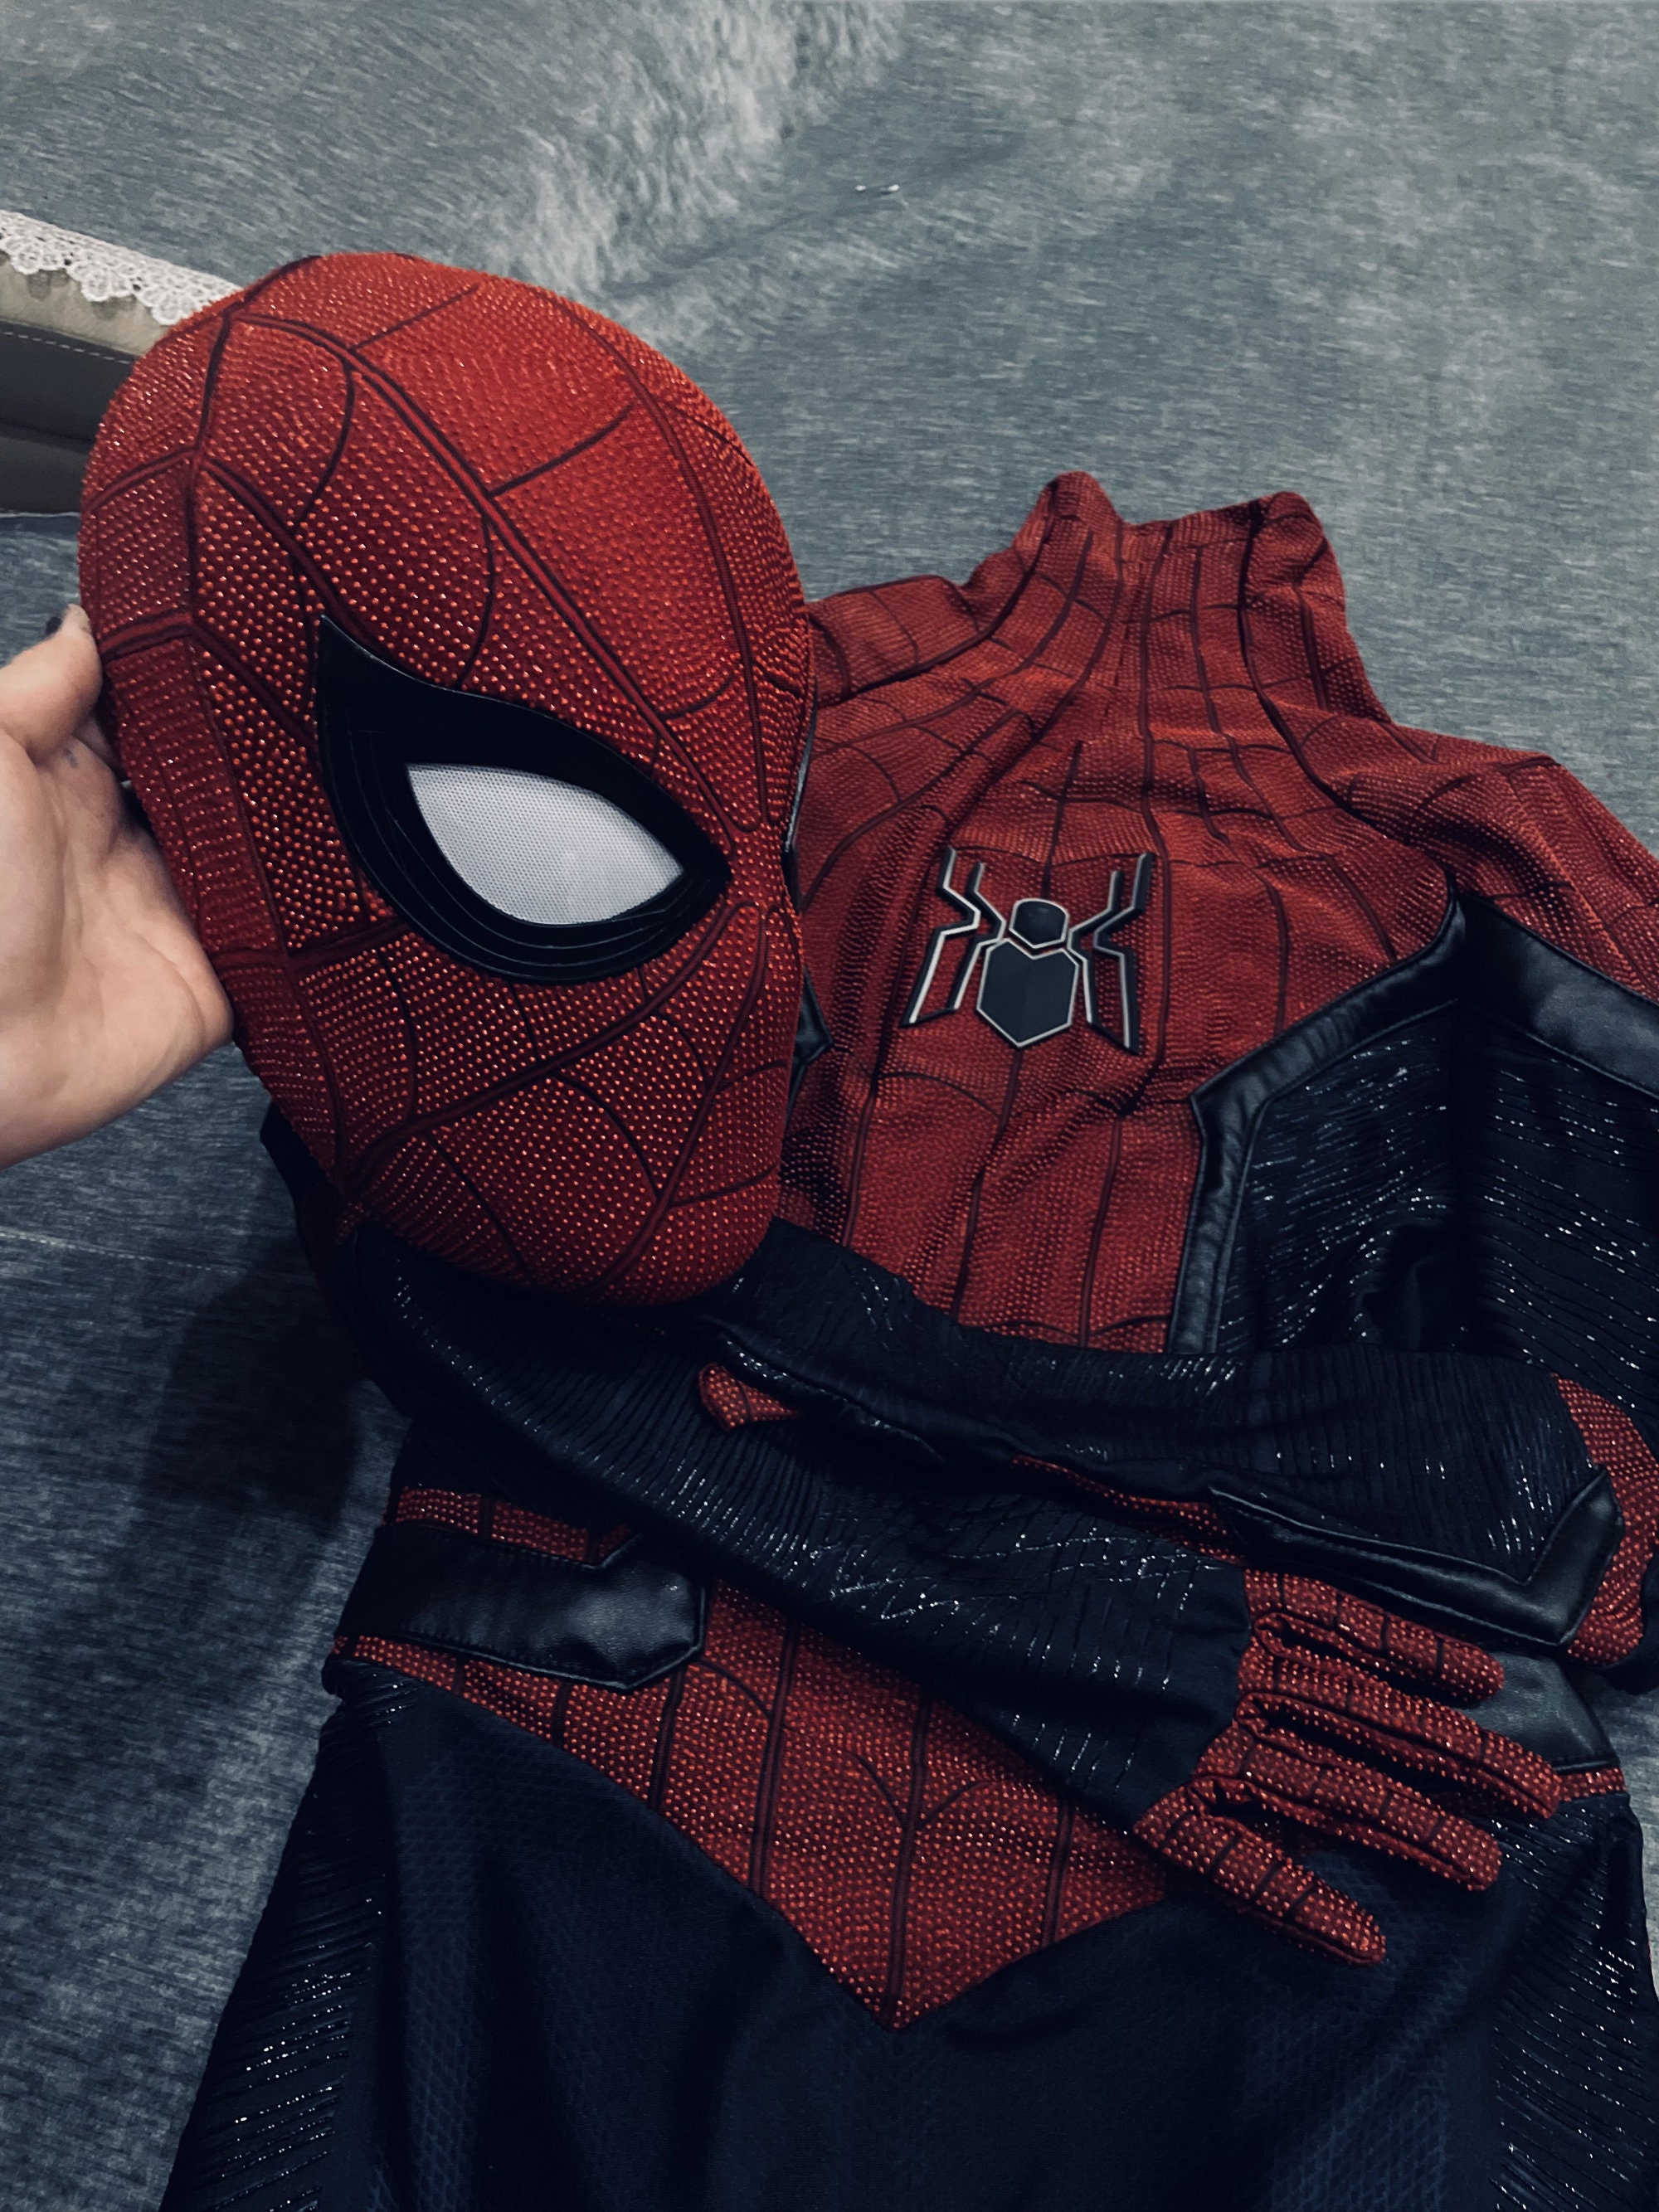 Spiderman Suit Far From Home -  UK